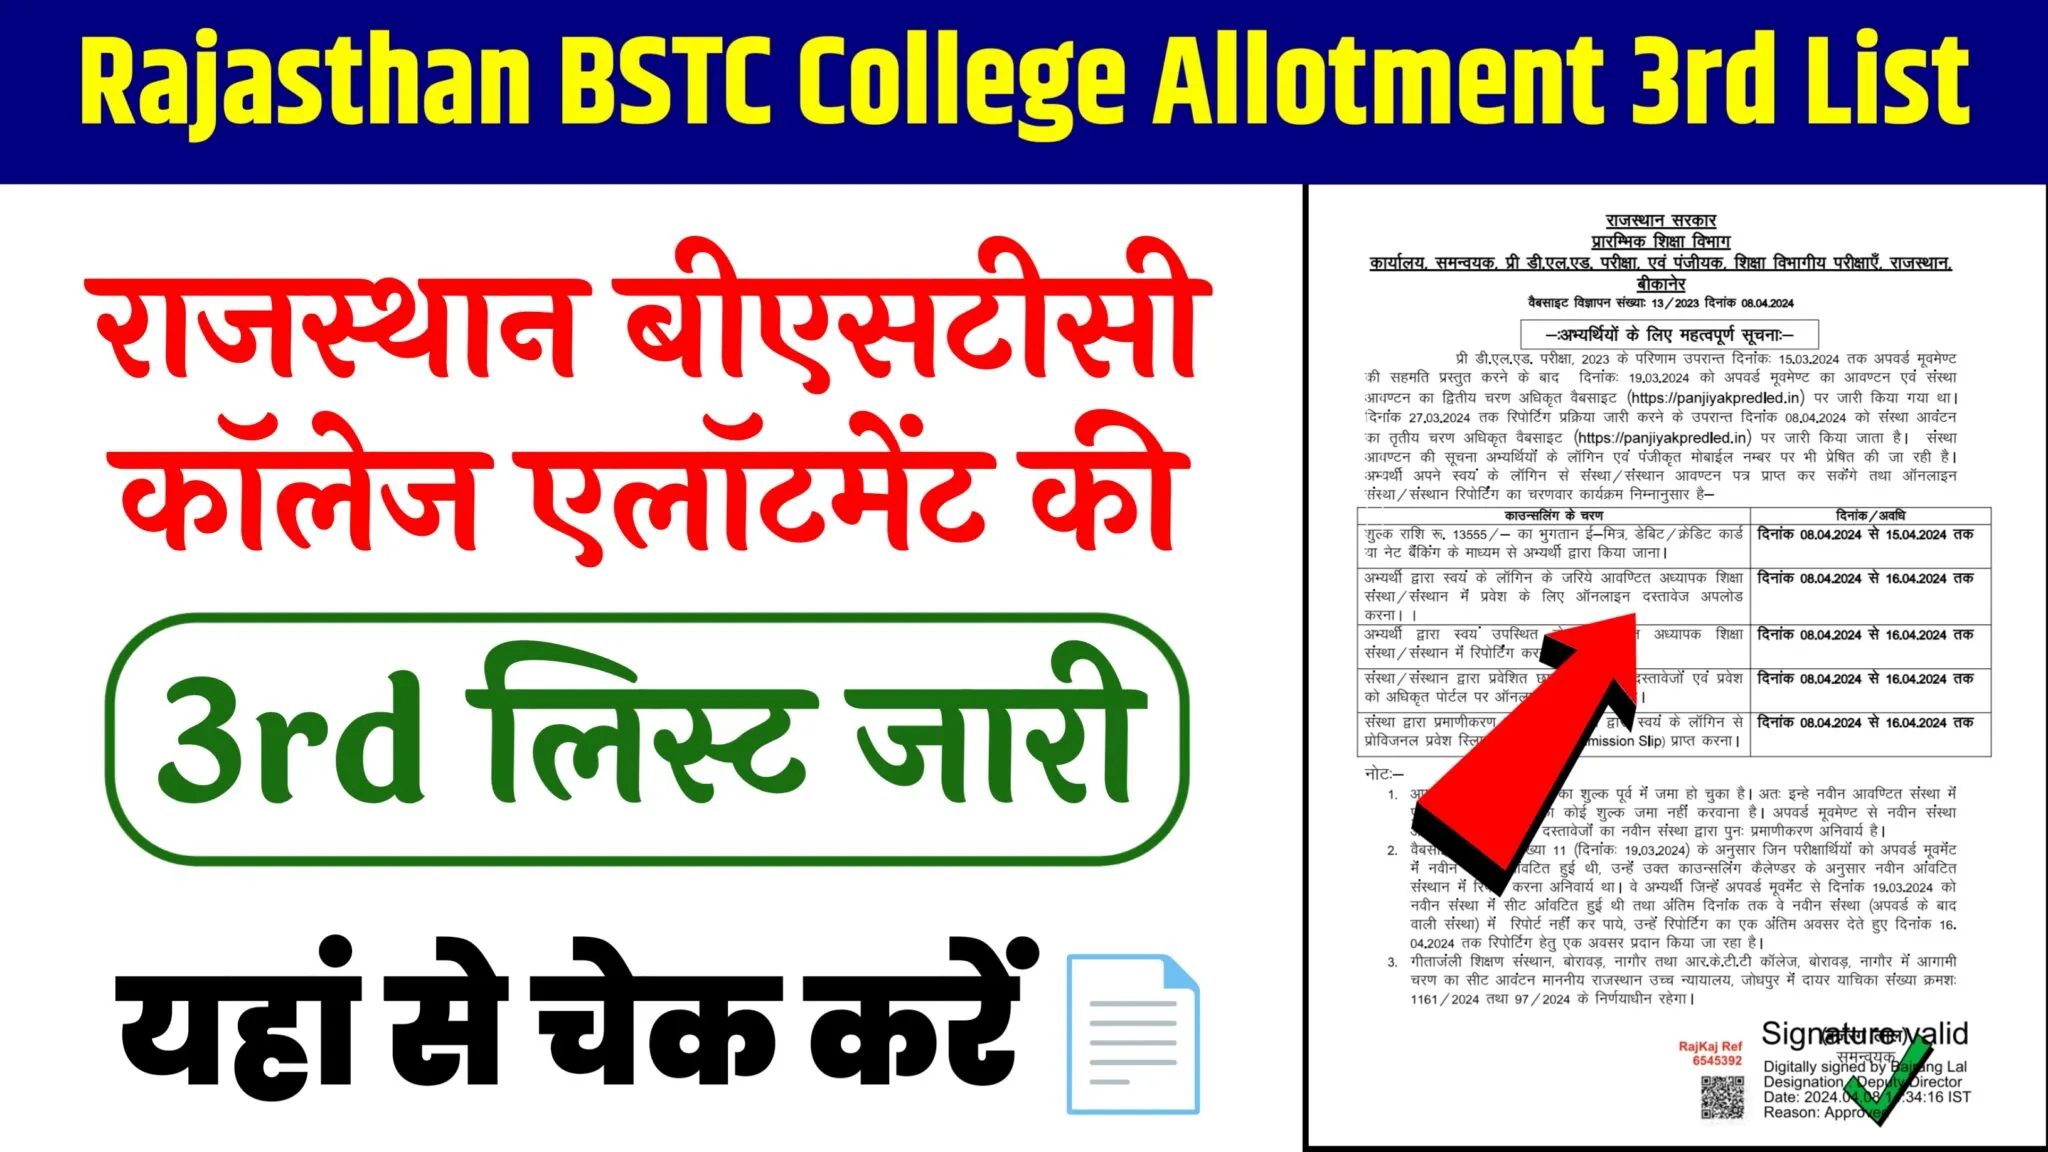 Rajasthan BSTC College Allotment